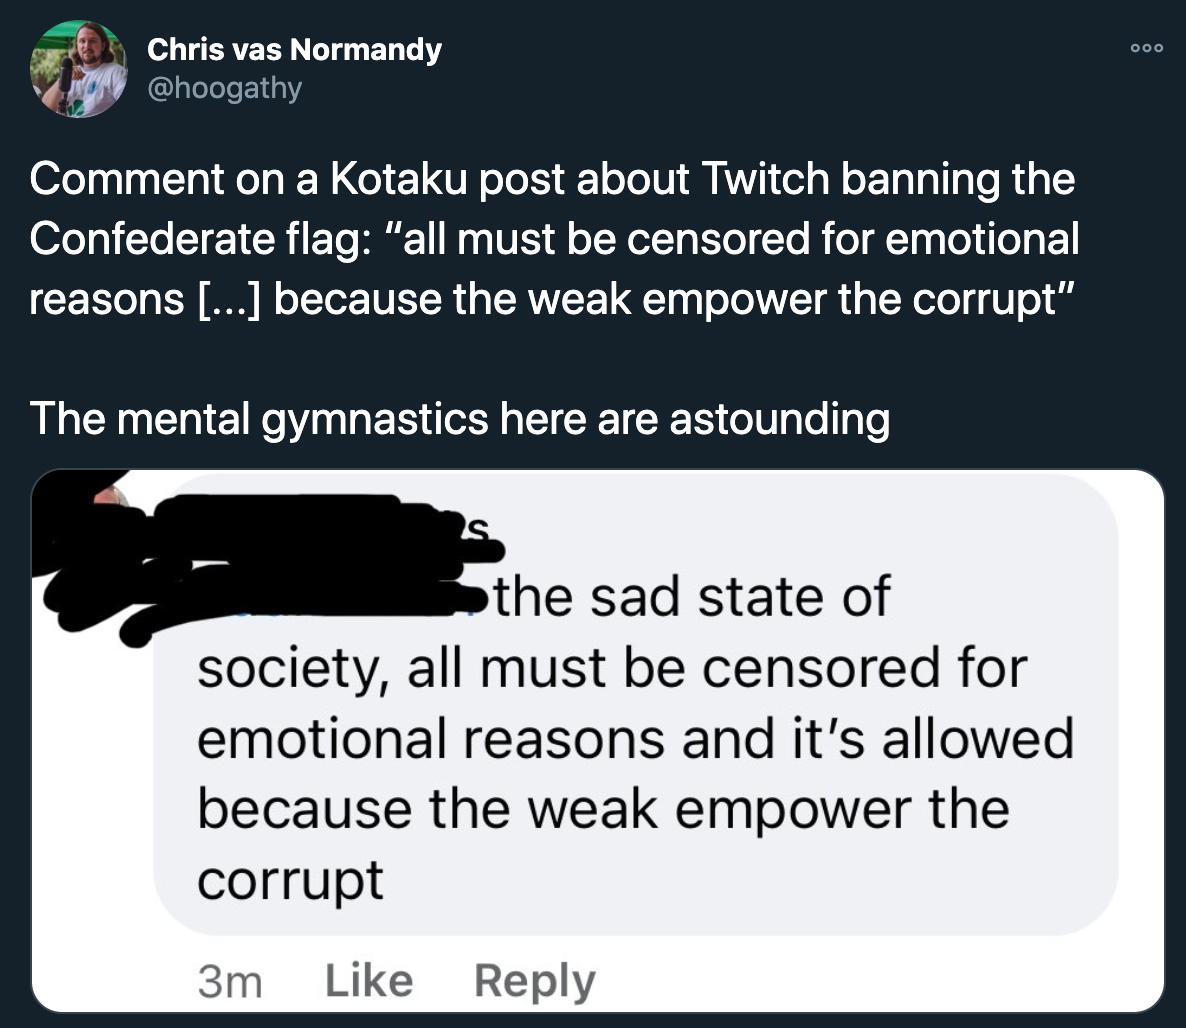 twitch confederate flag ban - Comment on a Kotaku post about Twitch banning the Confederate flag